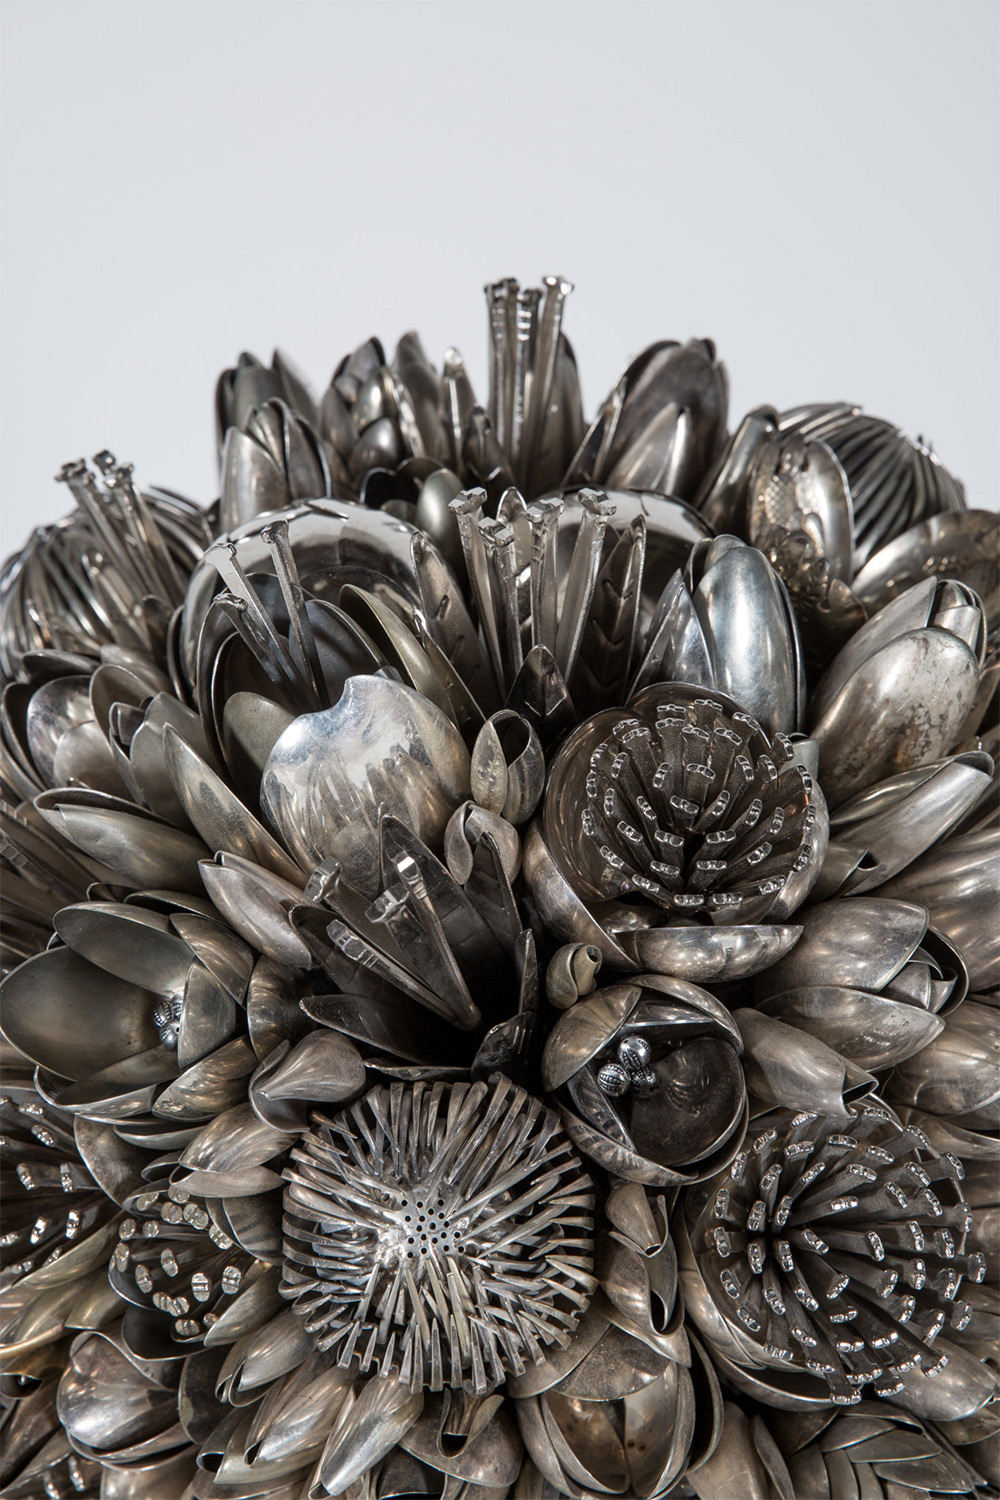 Amazingly Intricate Metal Bouquets Made Of Spare Utensils By Ann Carrington 2